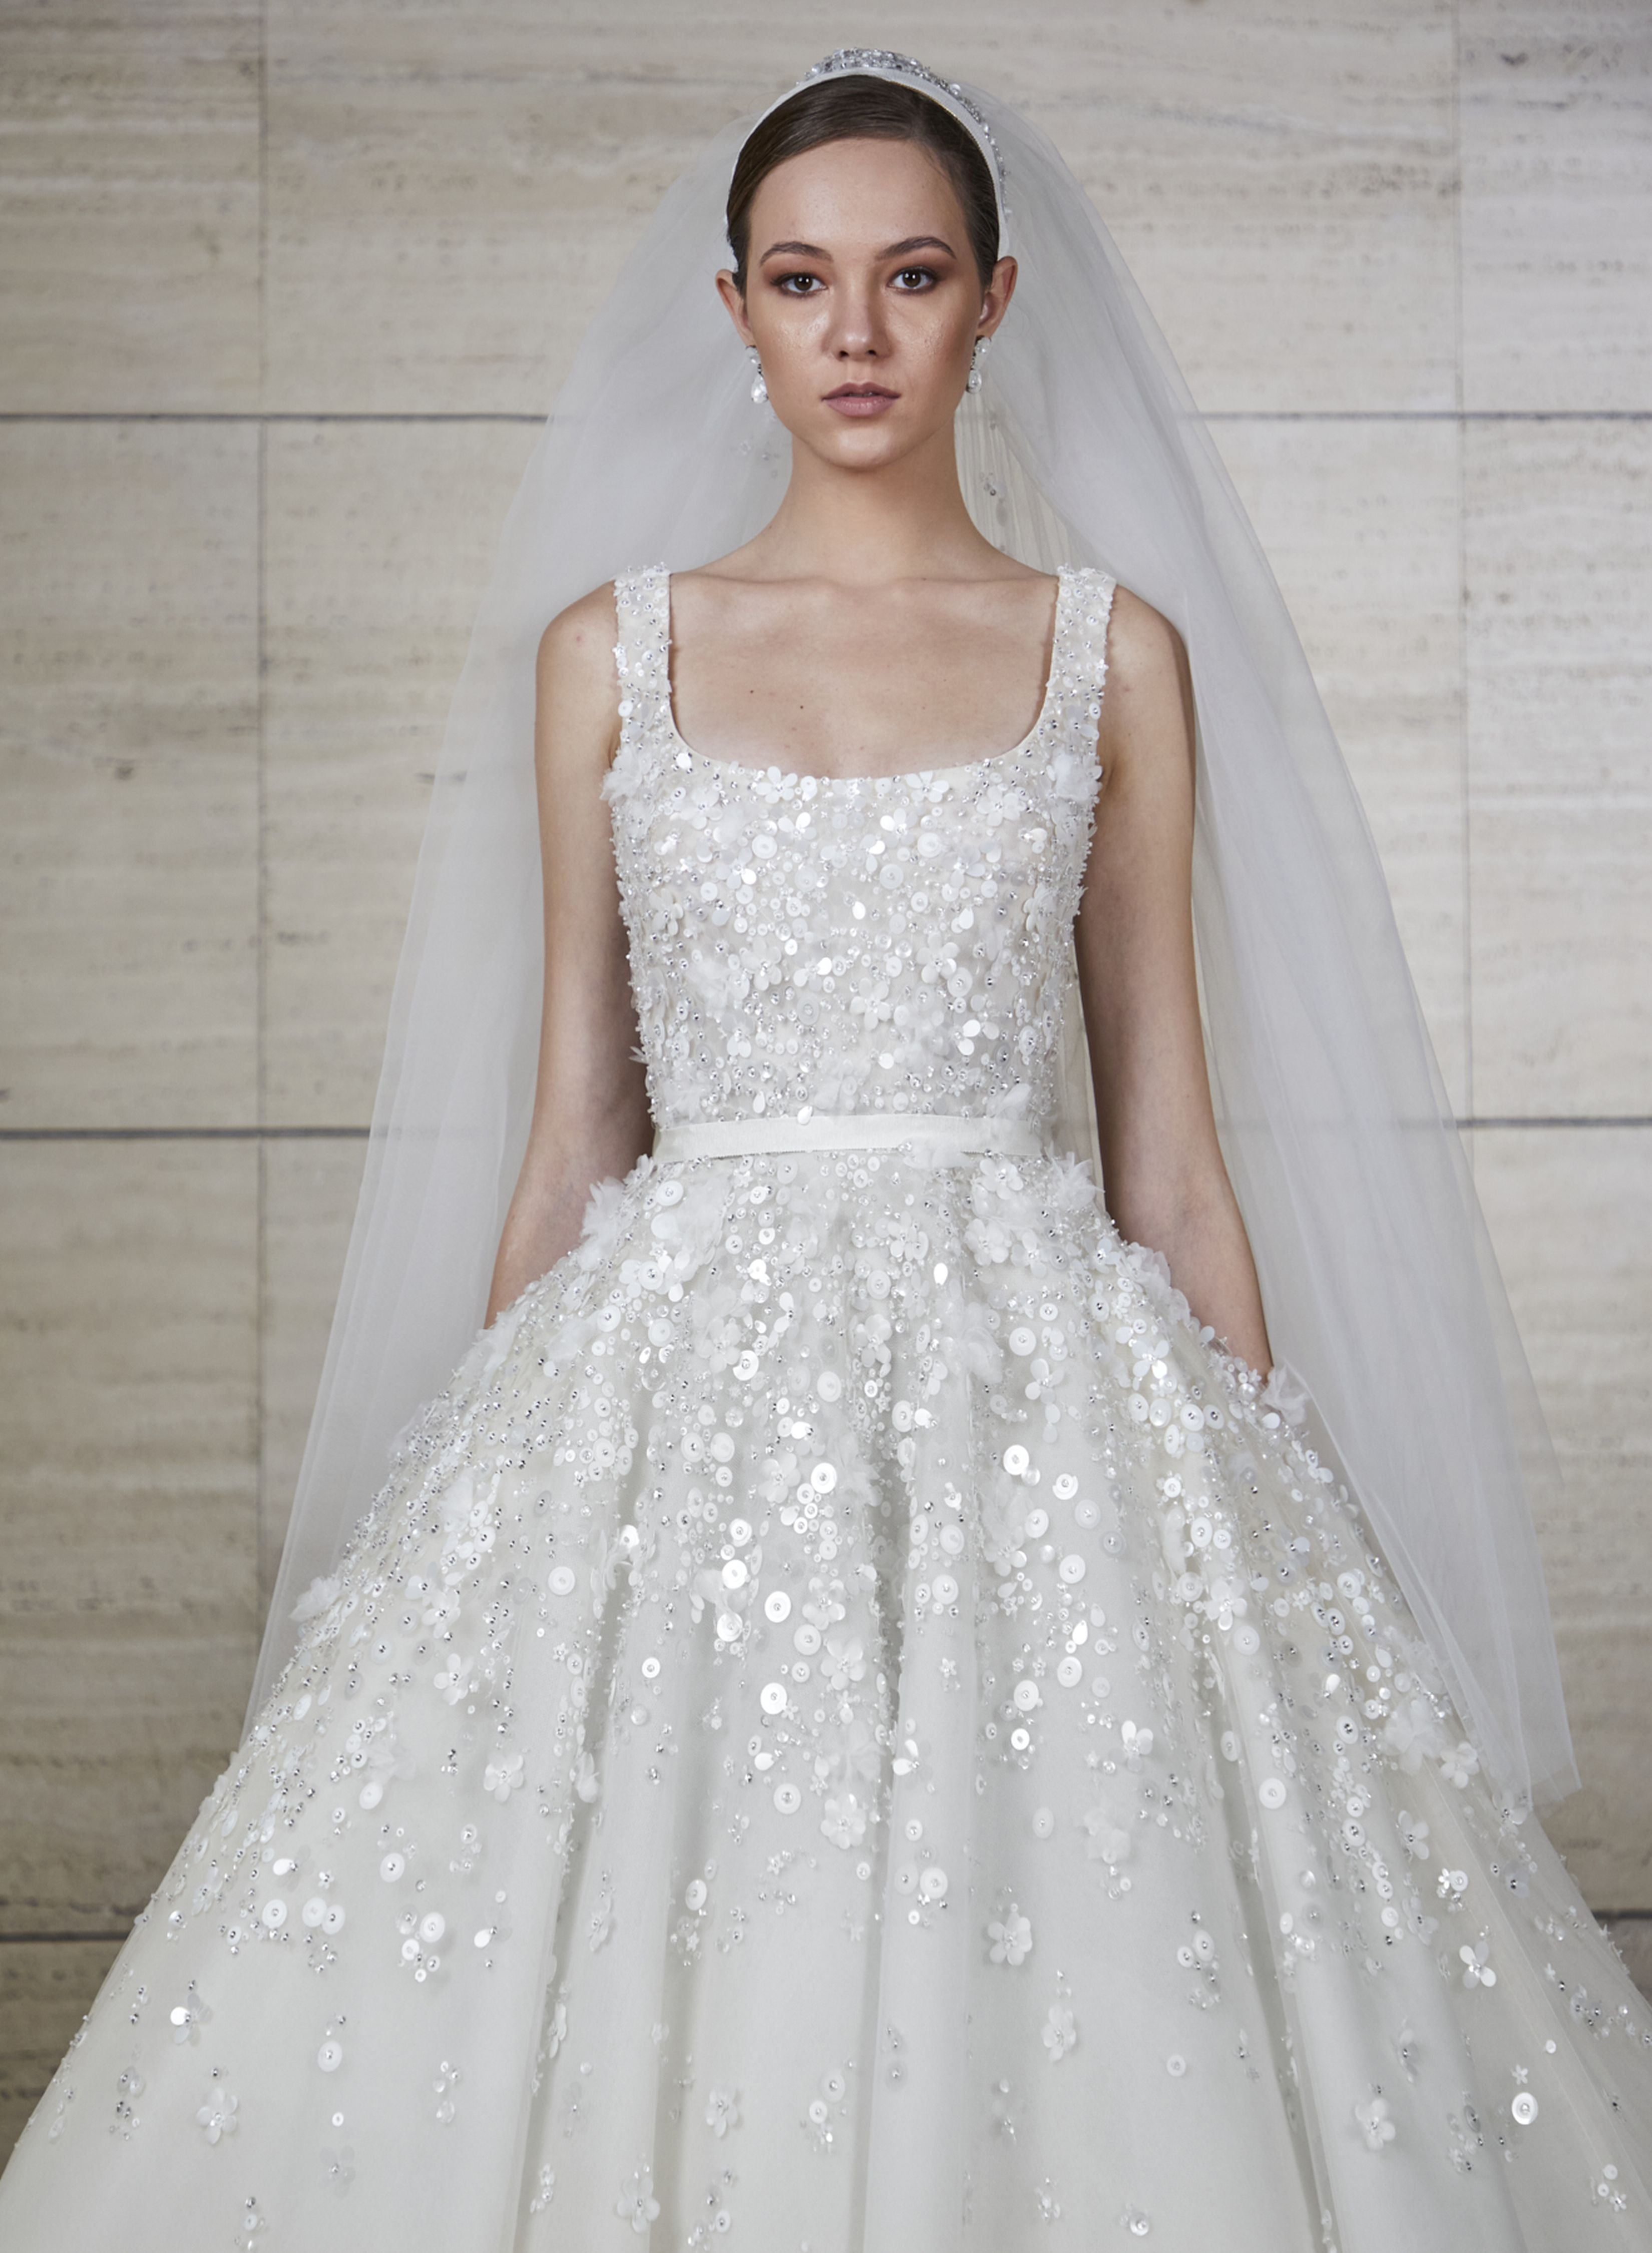 dominique cojuangco son ye jin elie saab wedding gown